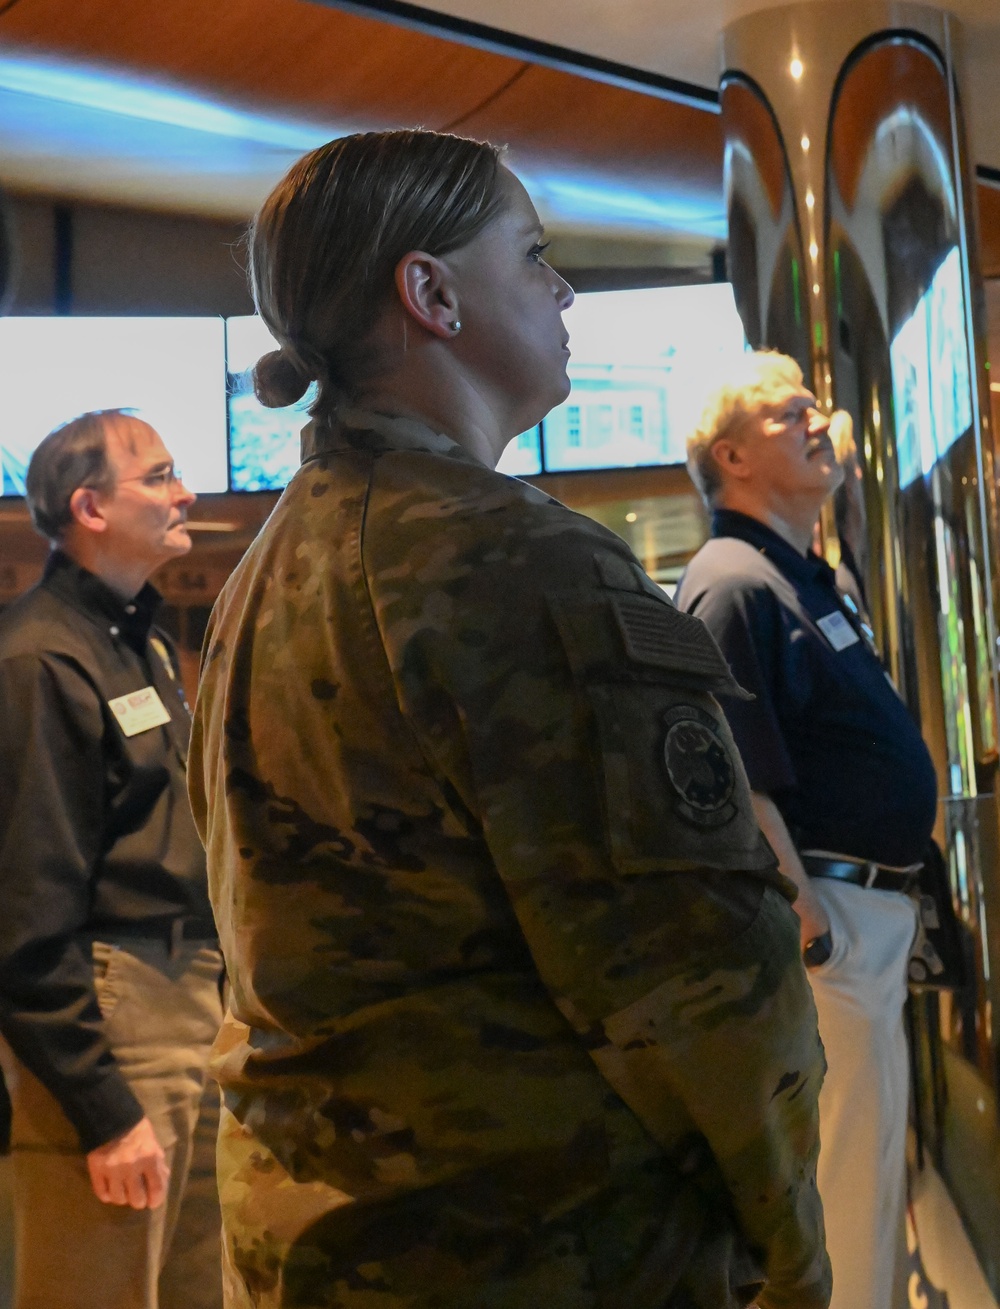 ESGR and Nebraska Air Guard honors Union Pacific supervisor for deployment support